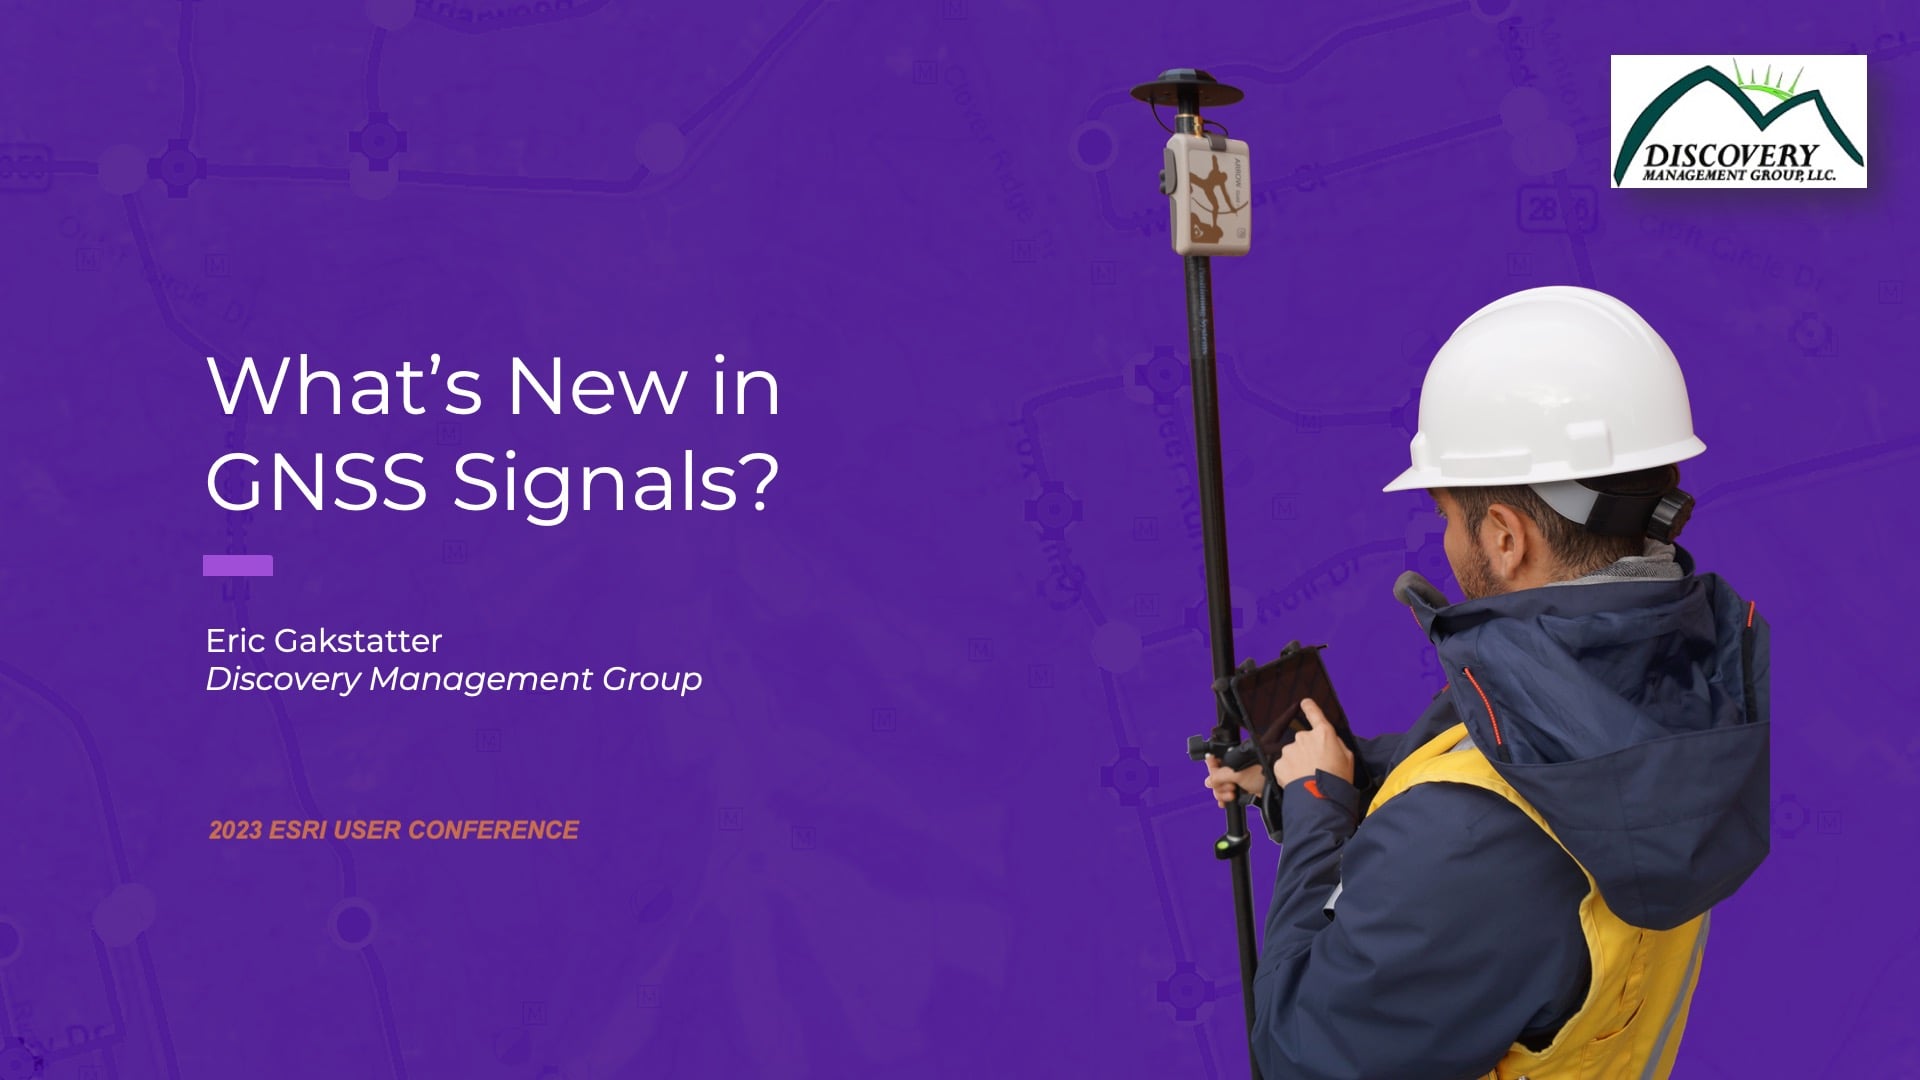 What's New in GNSS Signals?